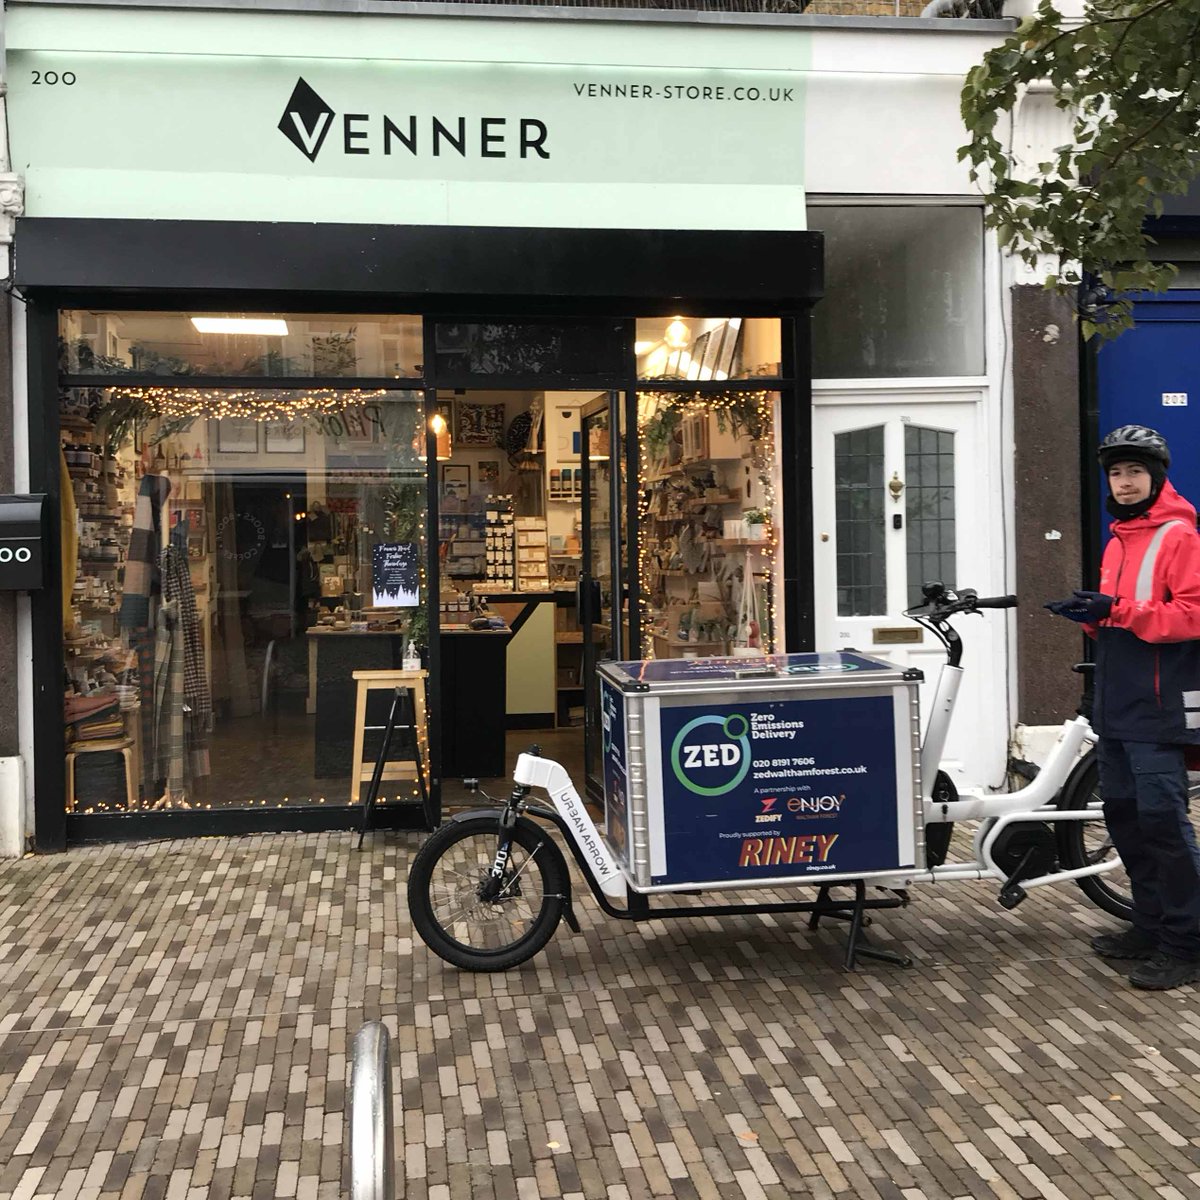 If you're local to us in postcodes E10, E11 or E17 online orders can be delivered by @zedlbwf a wonderful zero emission courier service. Not only is it eco-friendly, it's quick too, order by 4p.m. for delivery next working day 🚲💚😊 venner-store.co.uk/collections/sh… #WalthamForest